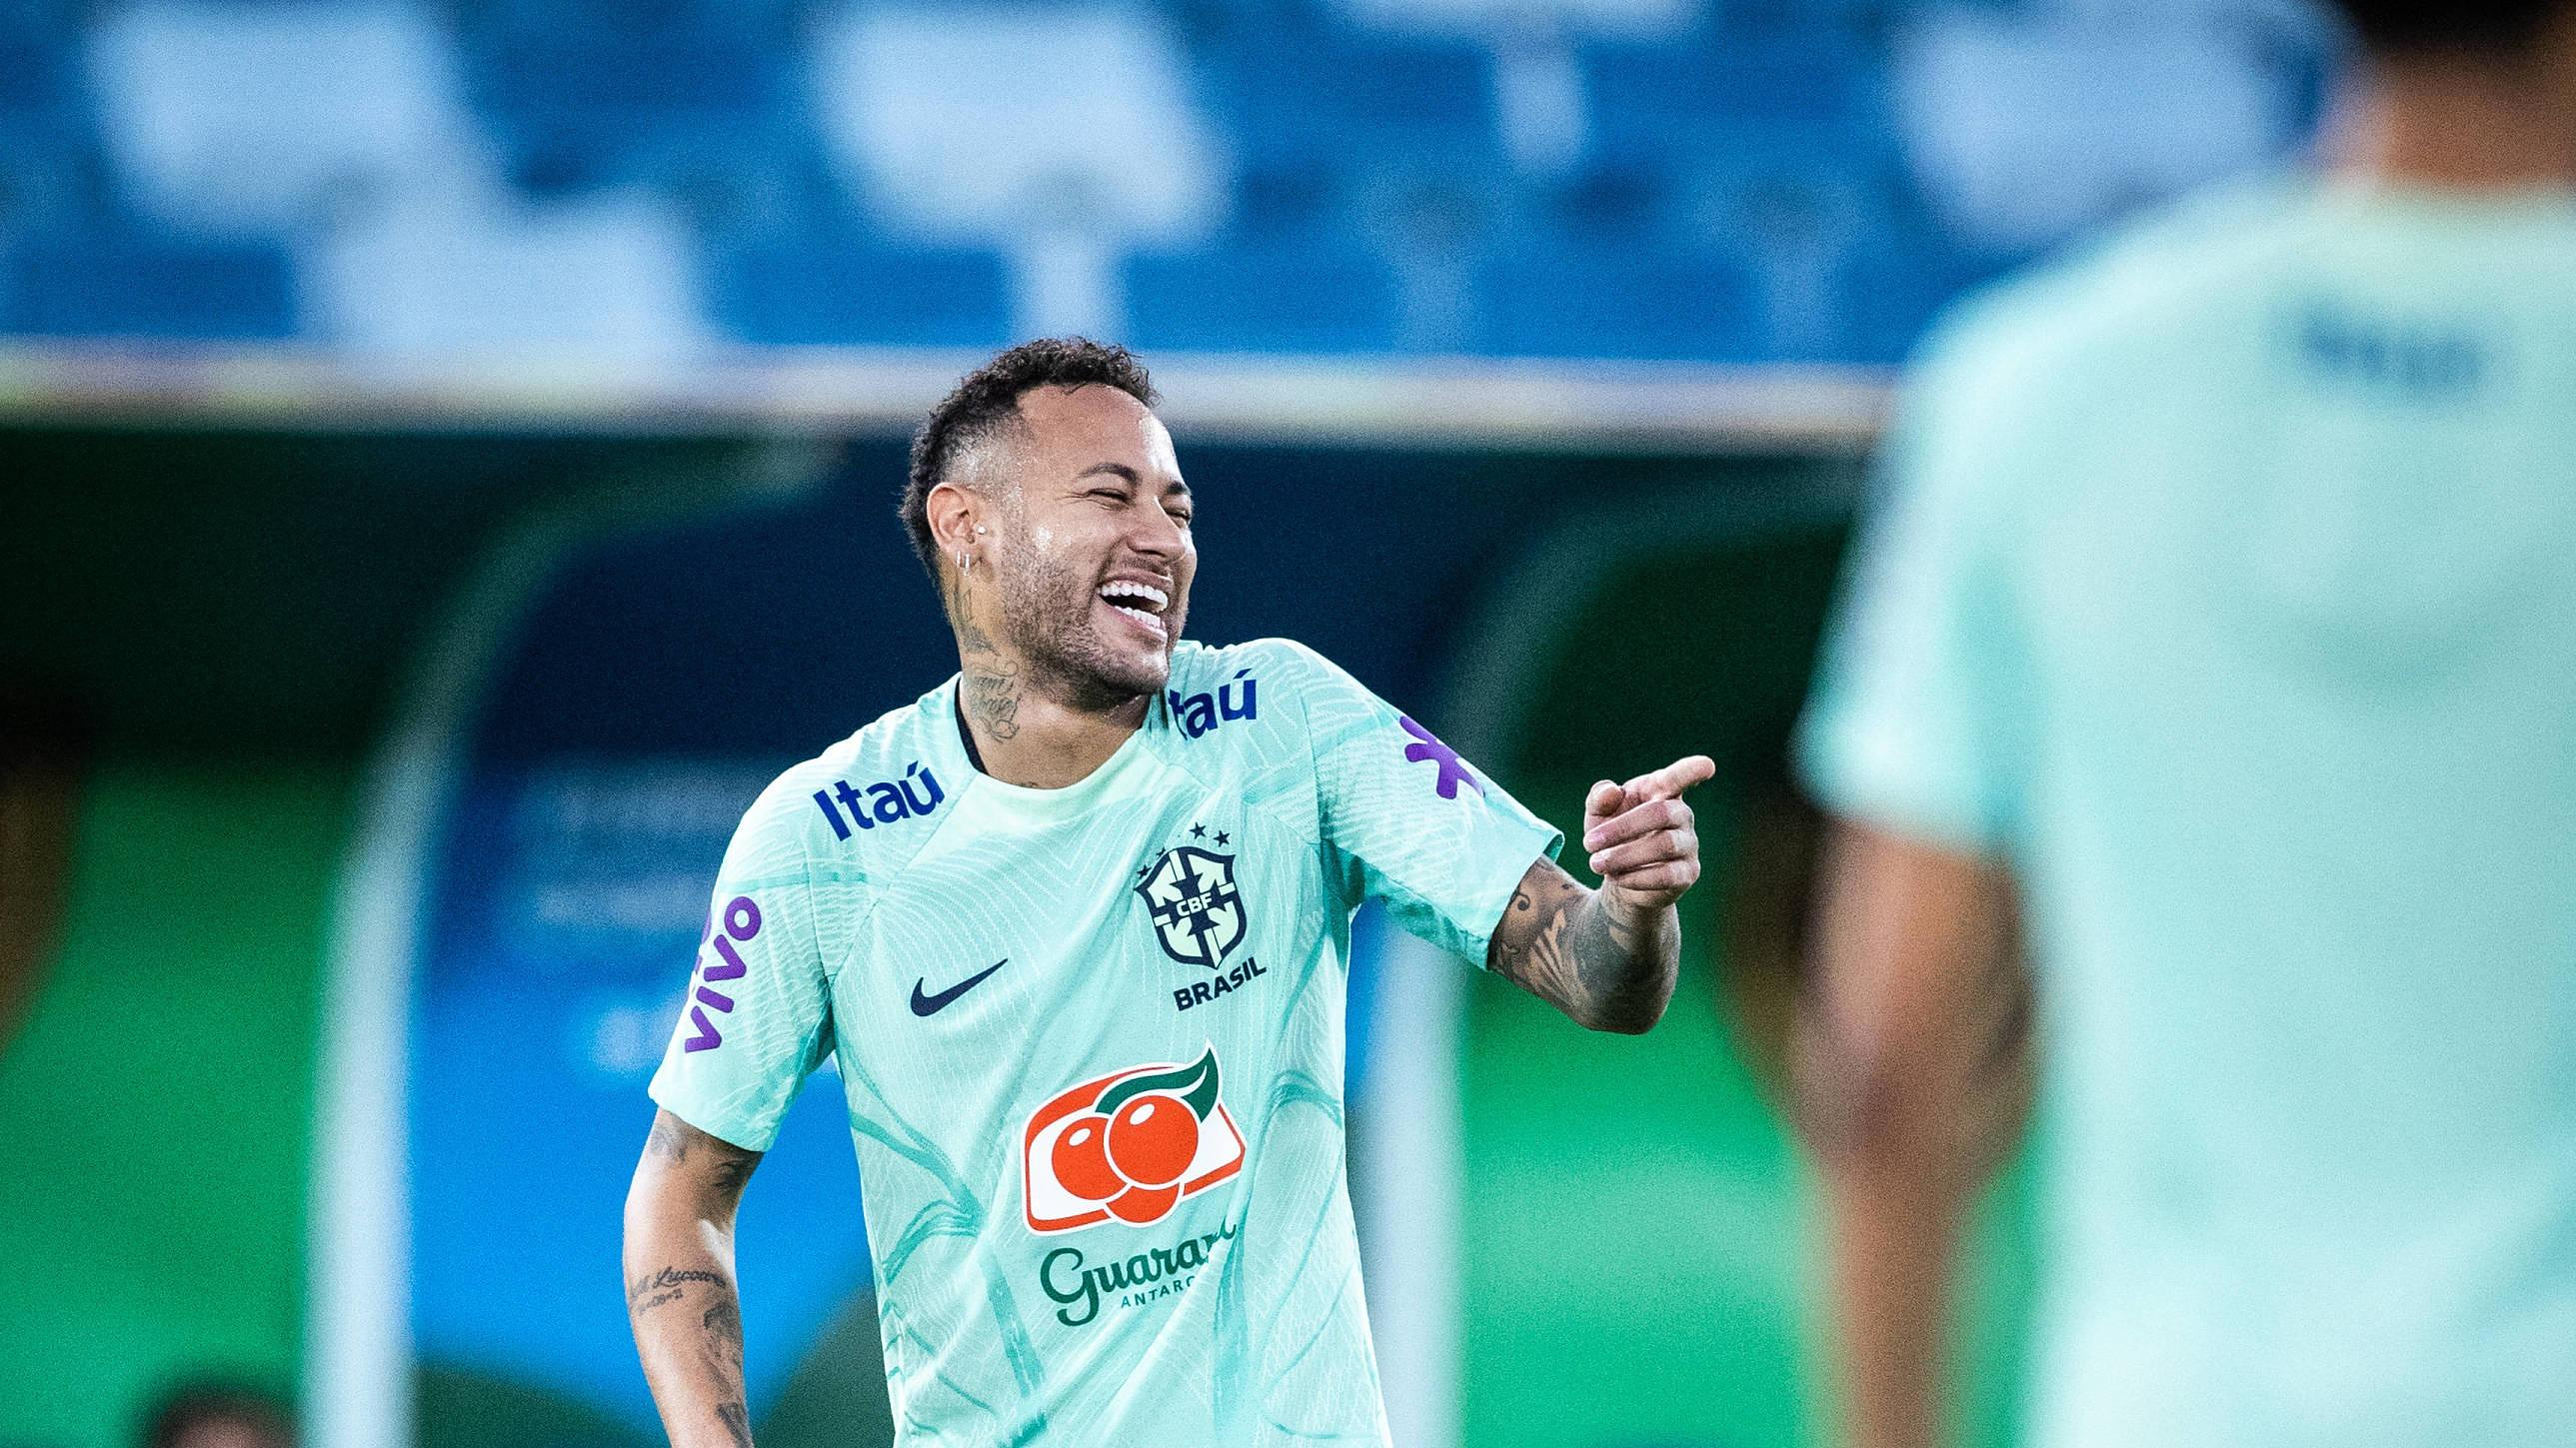 Football: what Neymar offers for his crazy end-of-year cruise